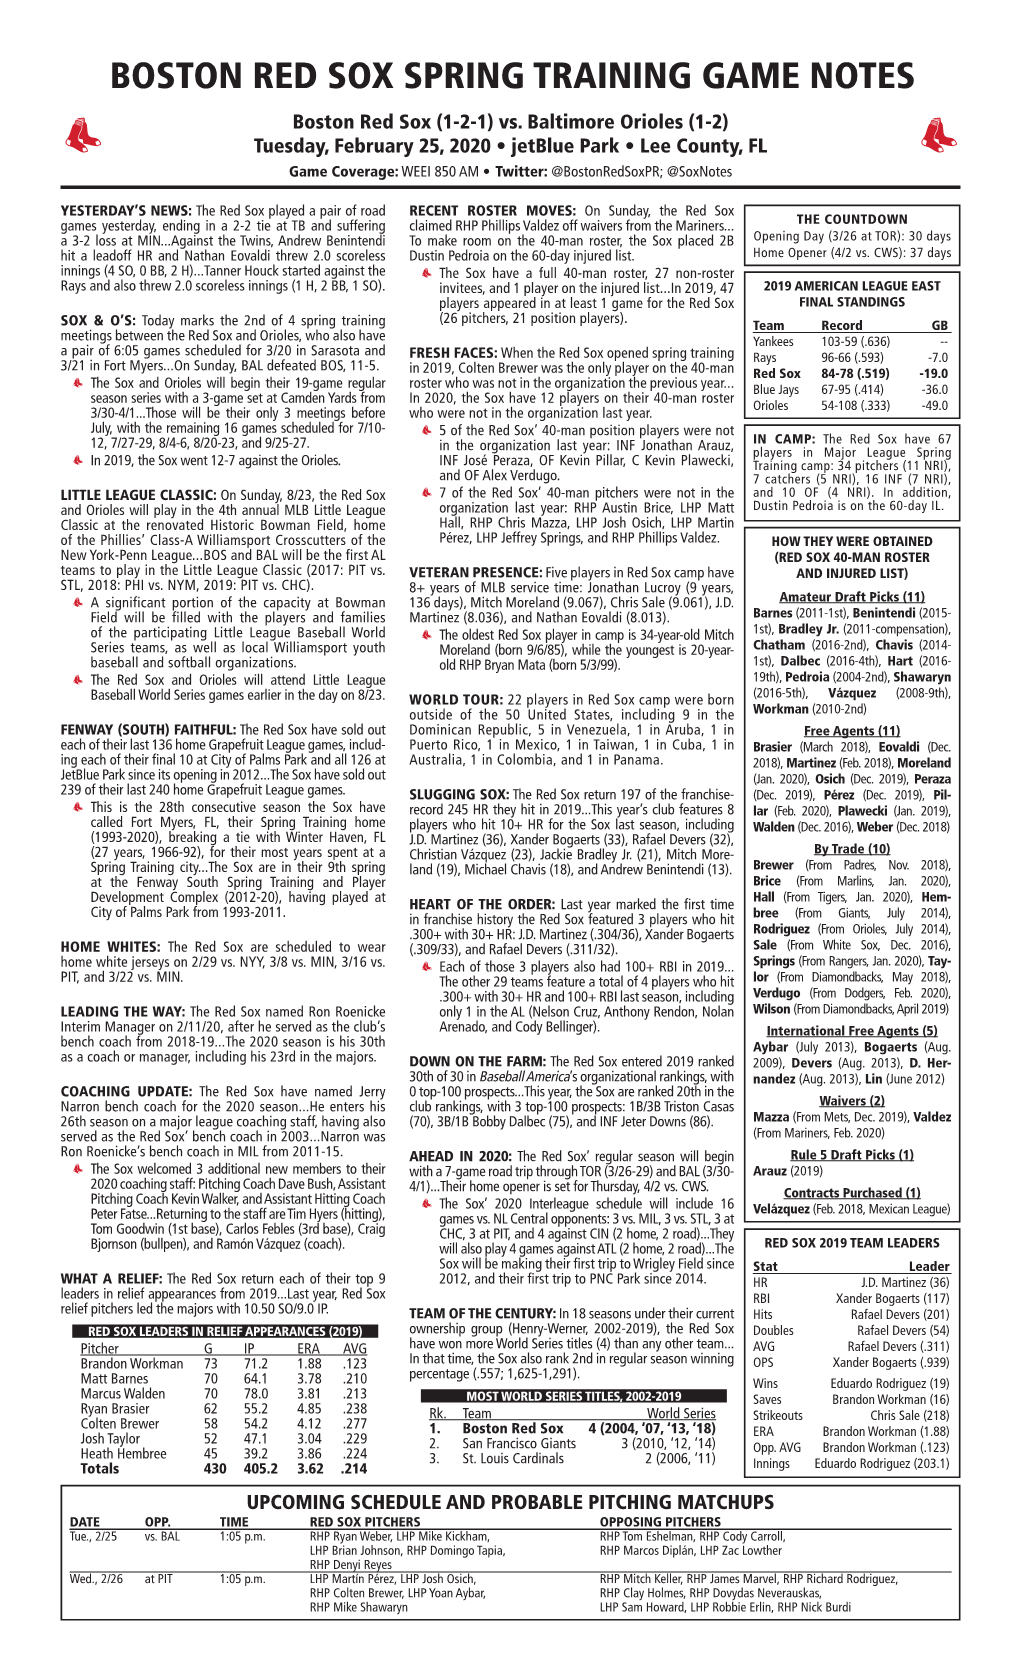 BOSTON RED SOX SPRING TRAINING GAME NOTES Boston Red Sox (1-2-1) Vs